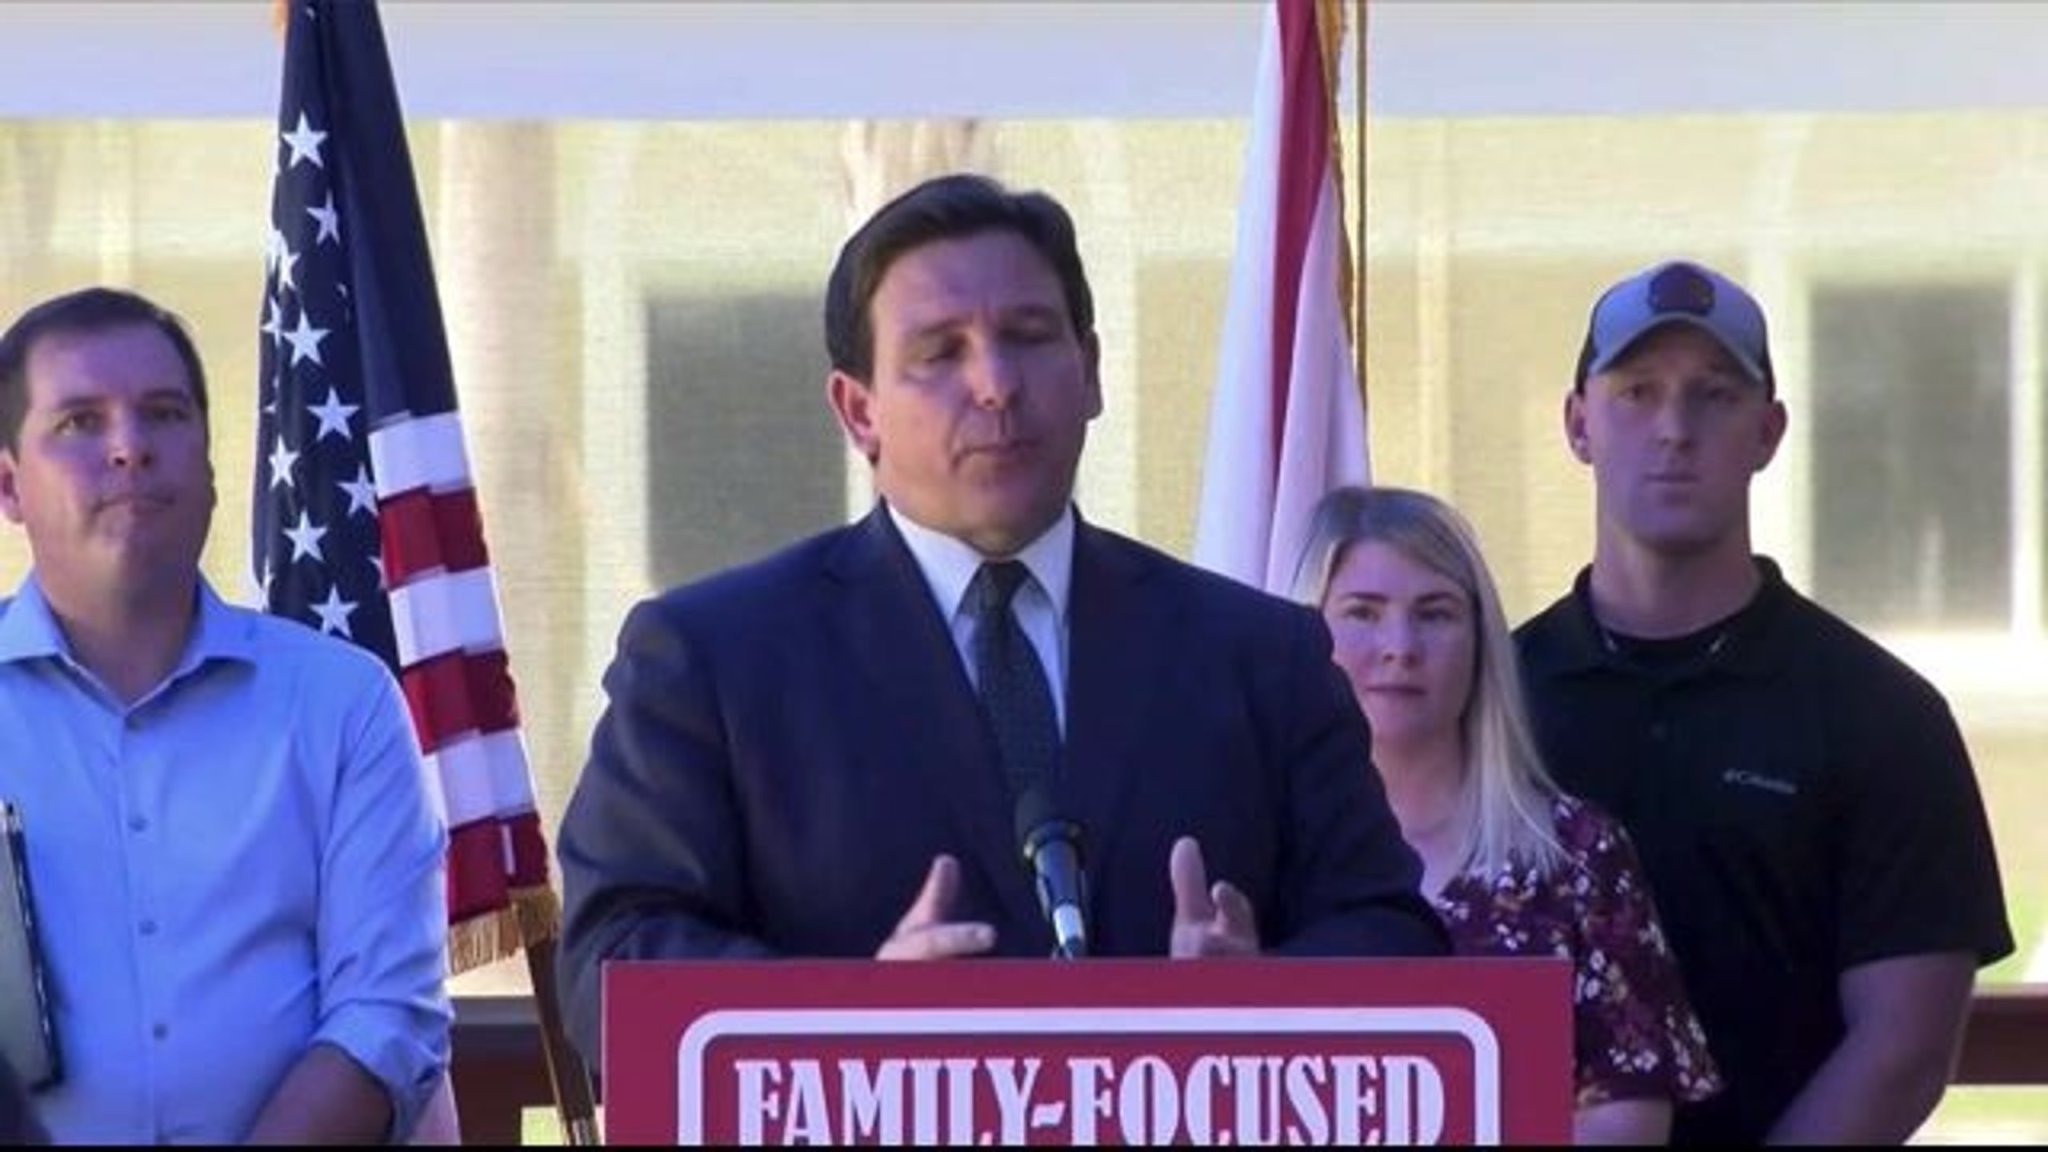 Gov. DeSantis (R-FL) asked why the state paid to transport migrants from Texas: "It’s just coming in onesie-twosies."